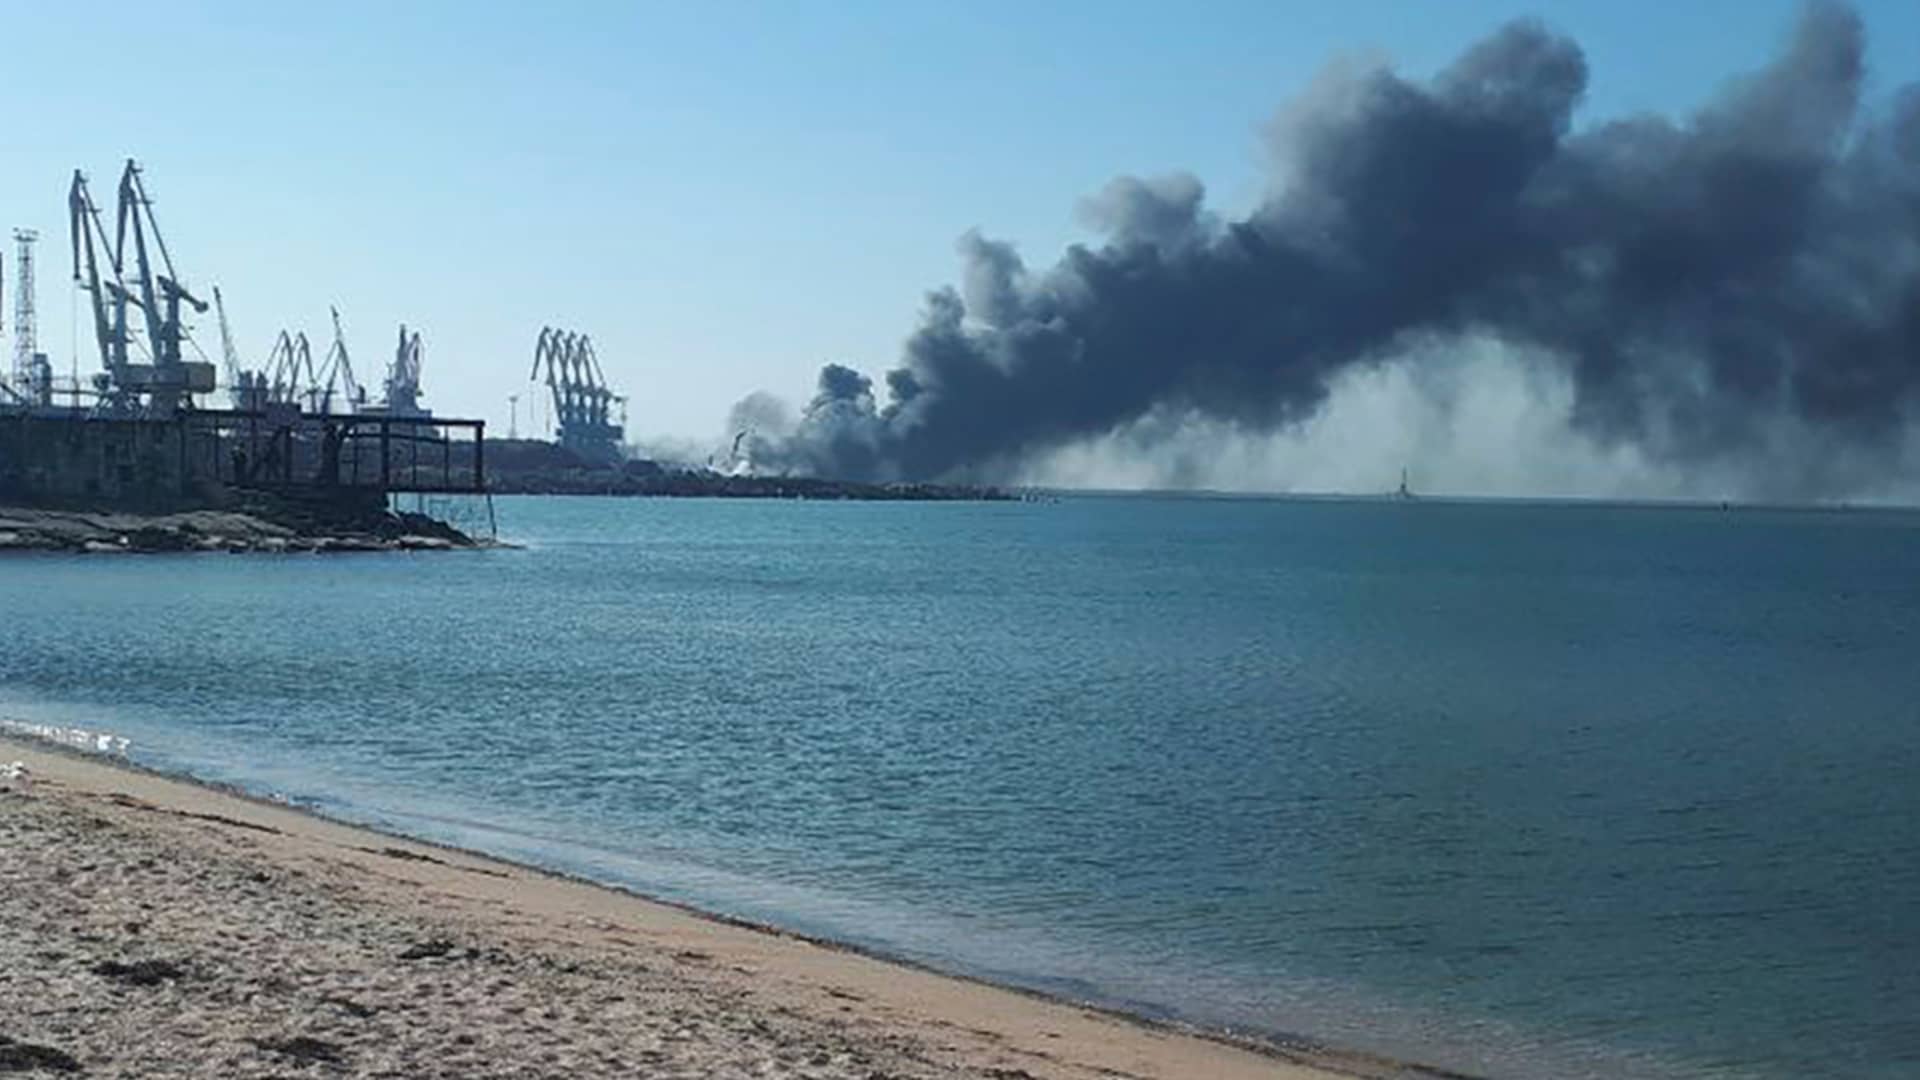 Smoke rises after shelling near a seaport in Berdyansk, Ukraine, Thursday, March 24, 2022. Ukraine's navy reported Thursday that it had sunk the Russian ship Orsk in the Sea of Asov near the port city of Berdyansk.